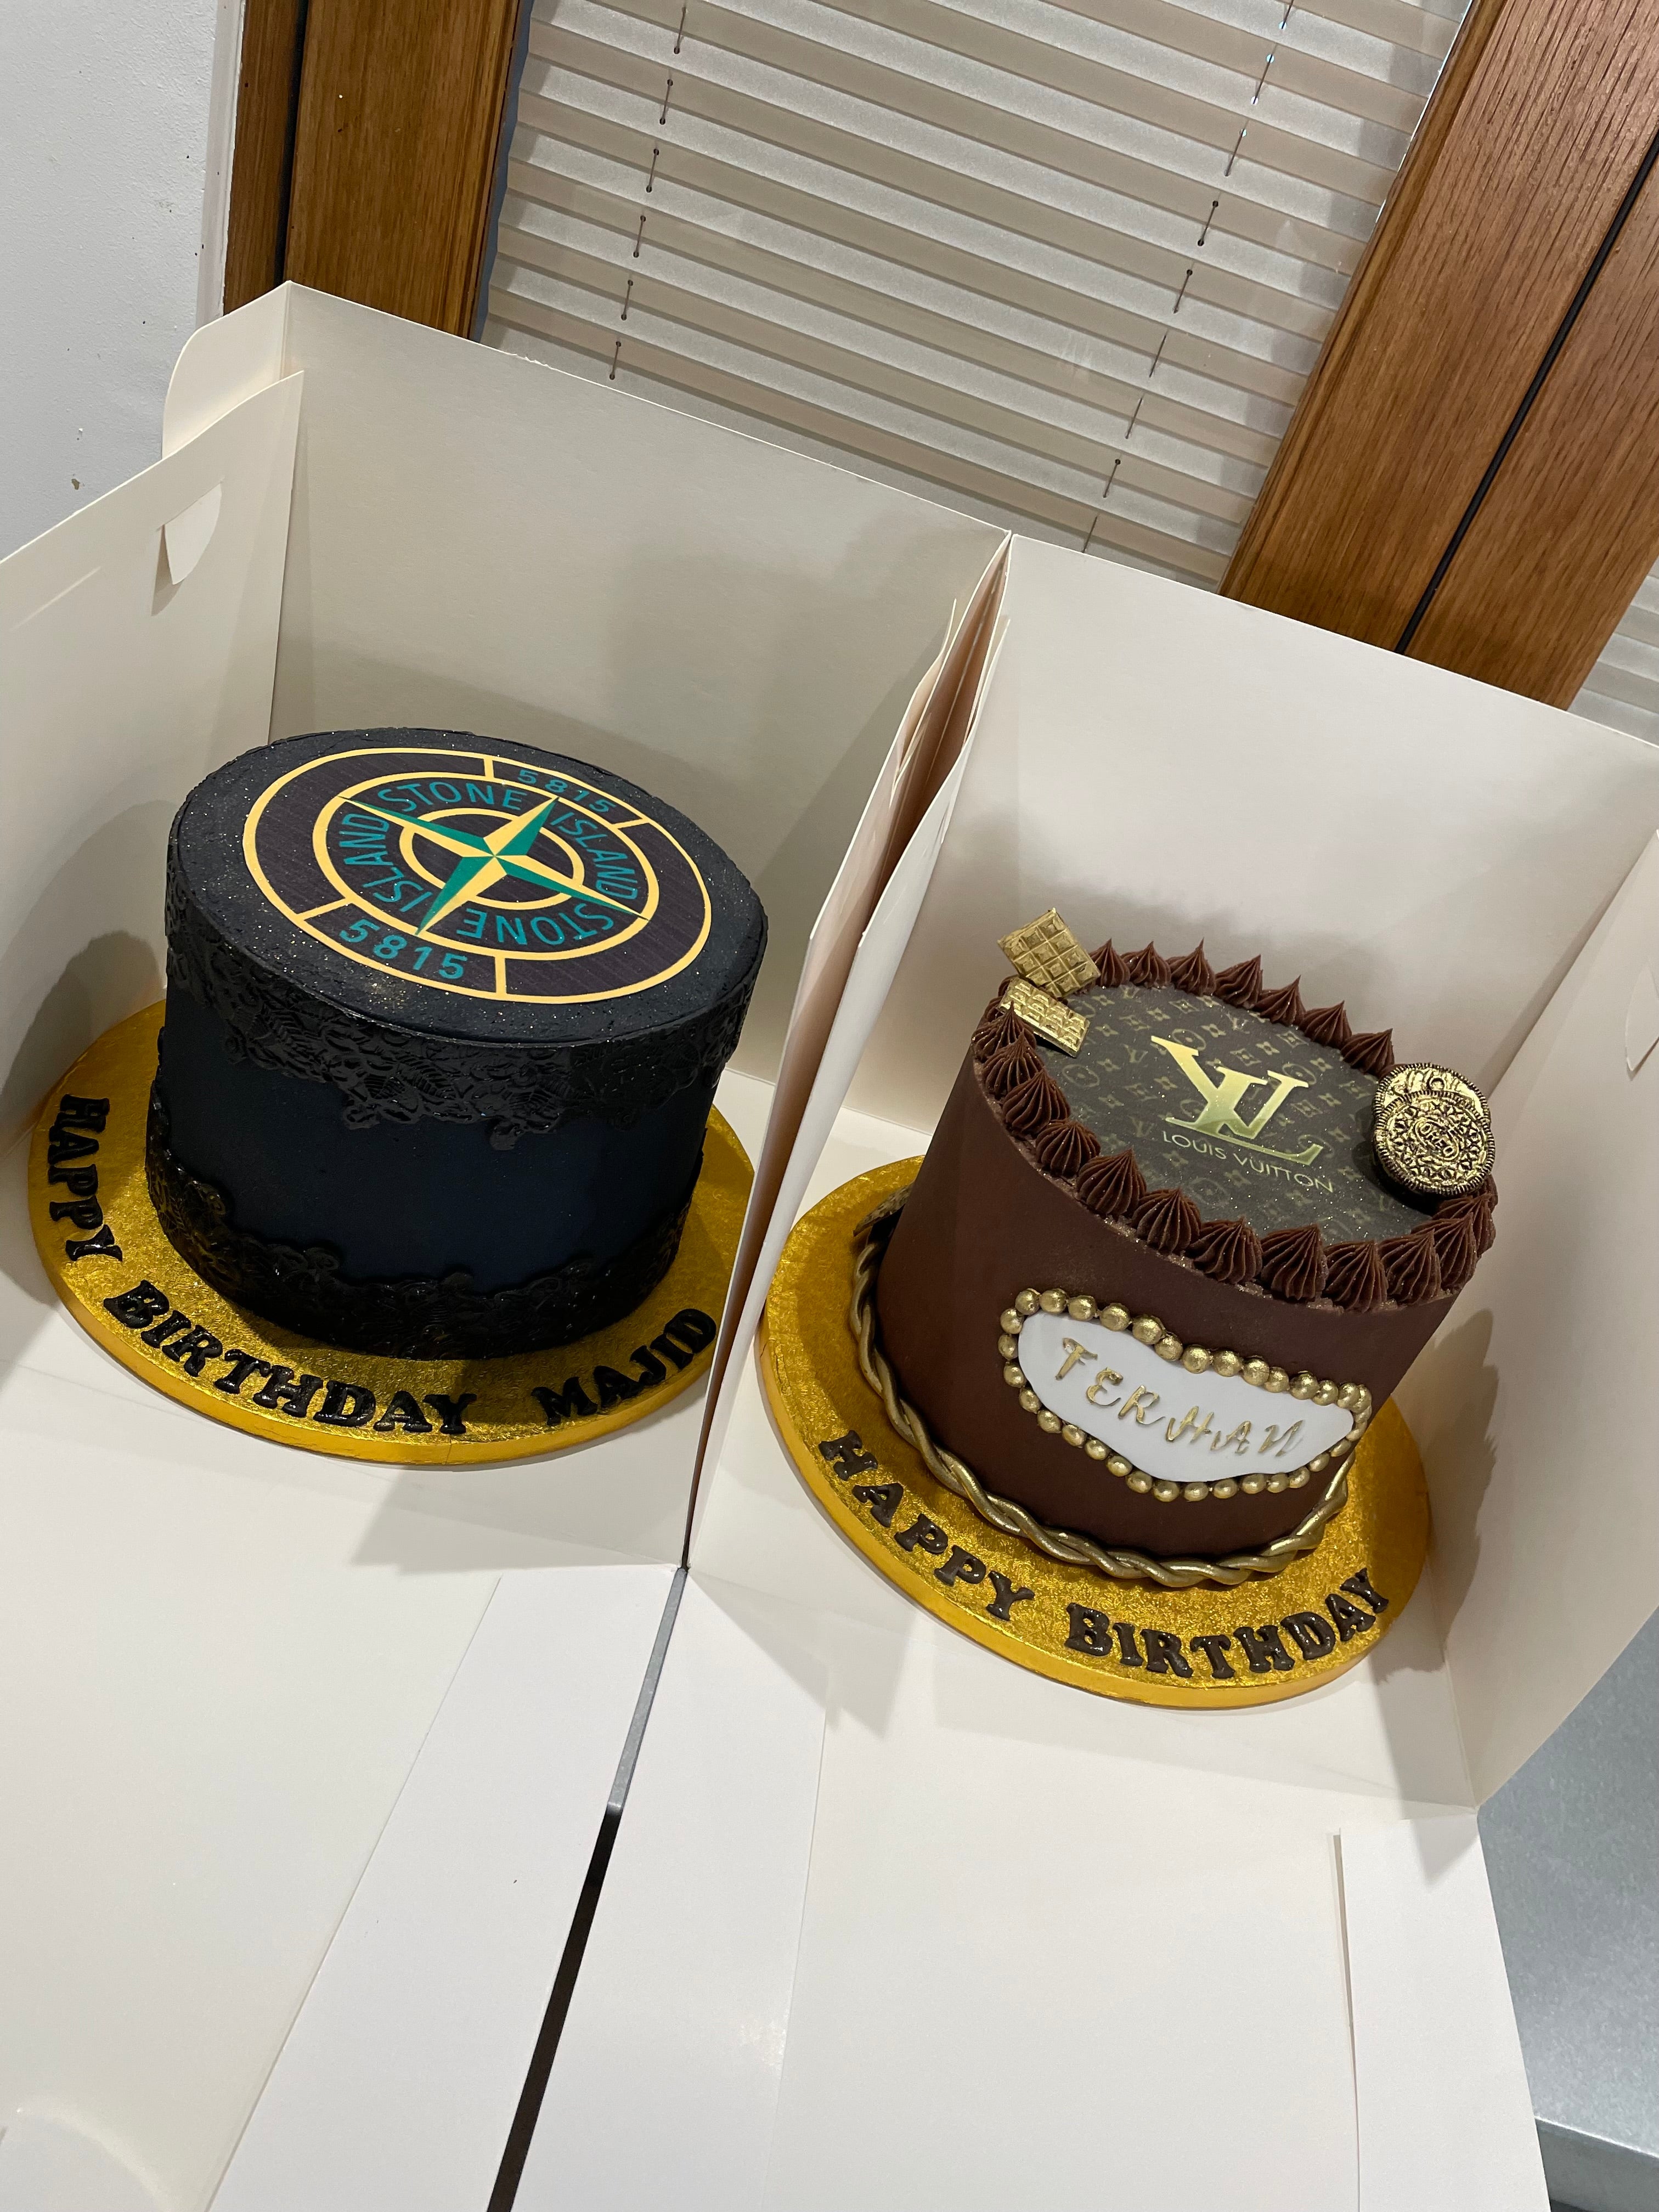 Harry Potter Themed Occasion Cake  Farah's Dessert Heaven – FARAH'S  DESSERT HEAVEN